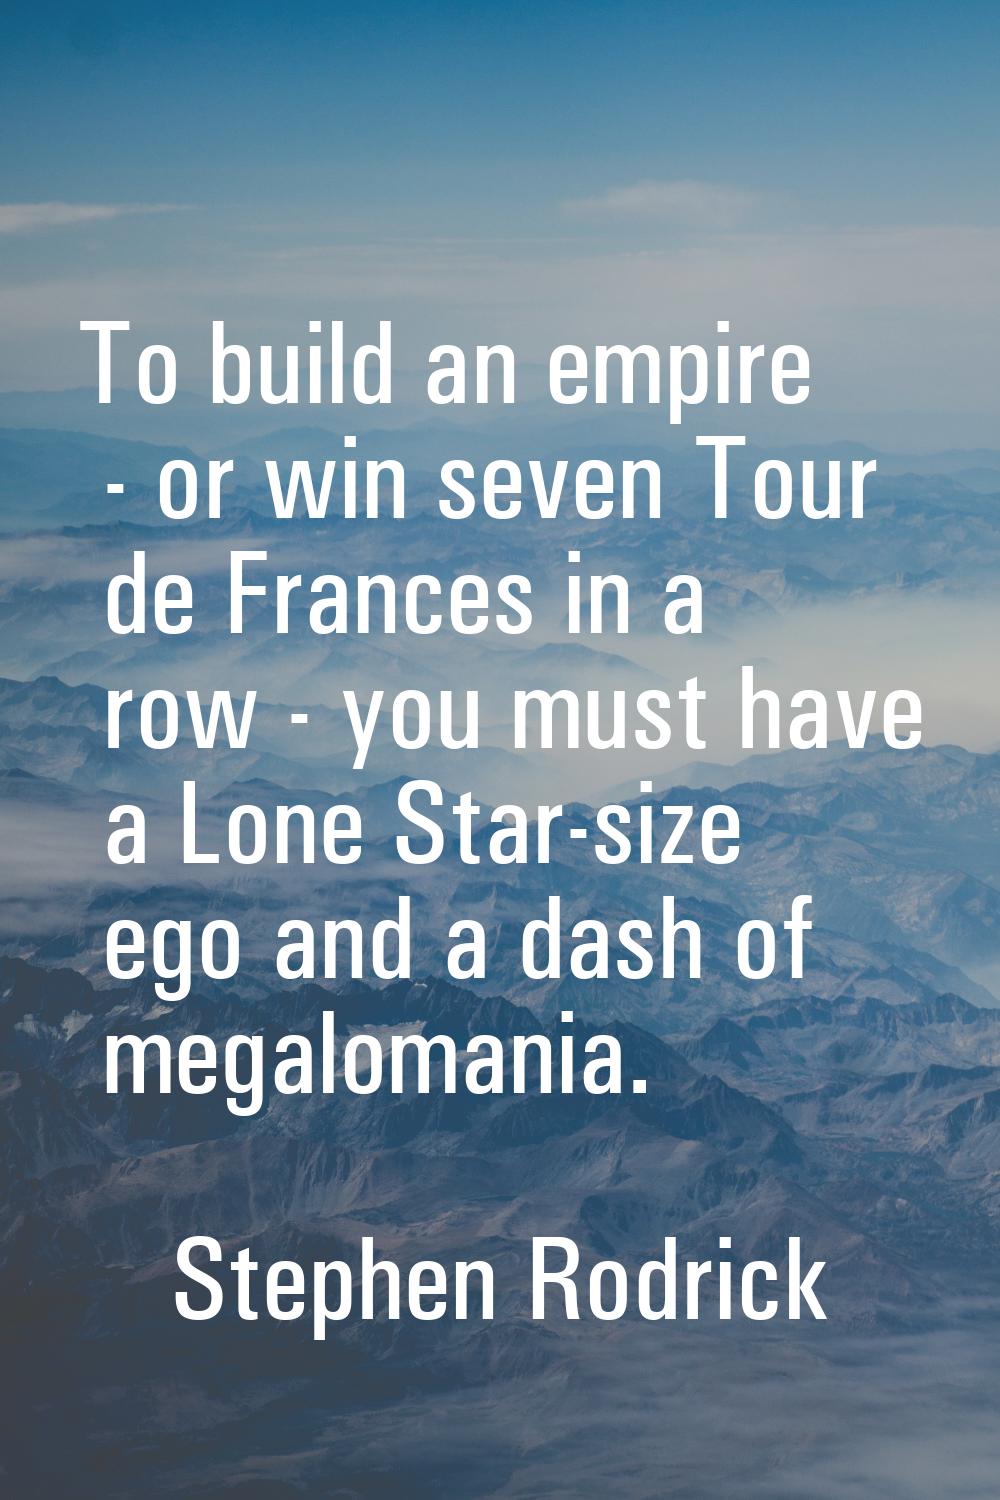 To build an empire - or win seven Tour de Frances in a row - you must have a Lone Star-size ego and